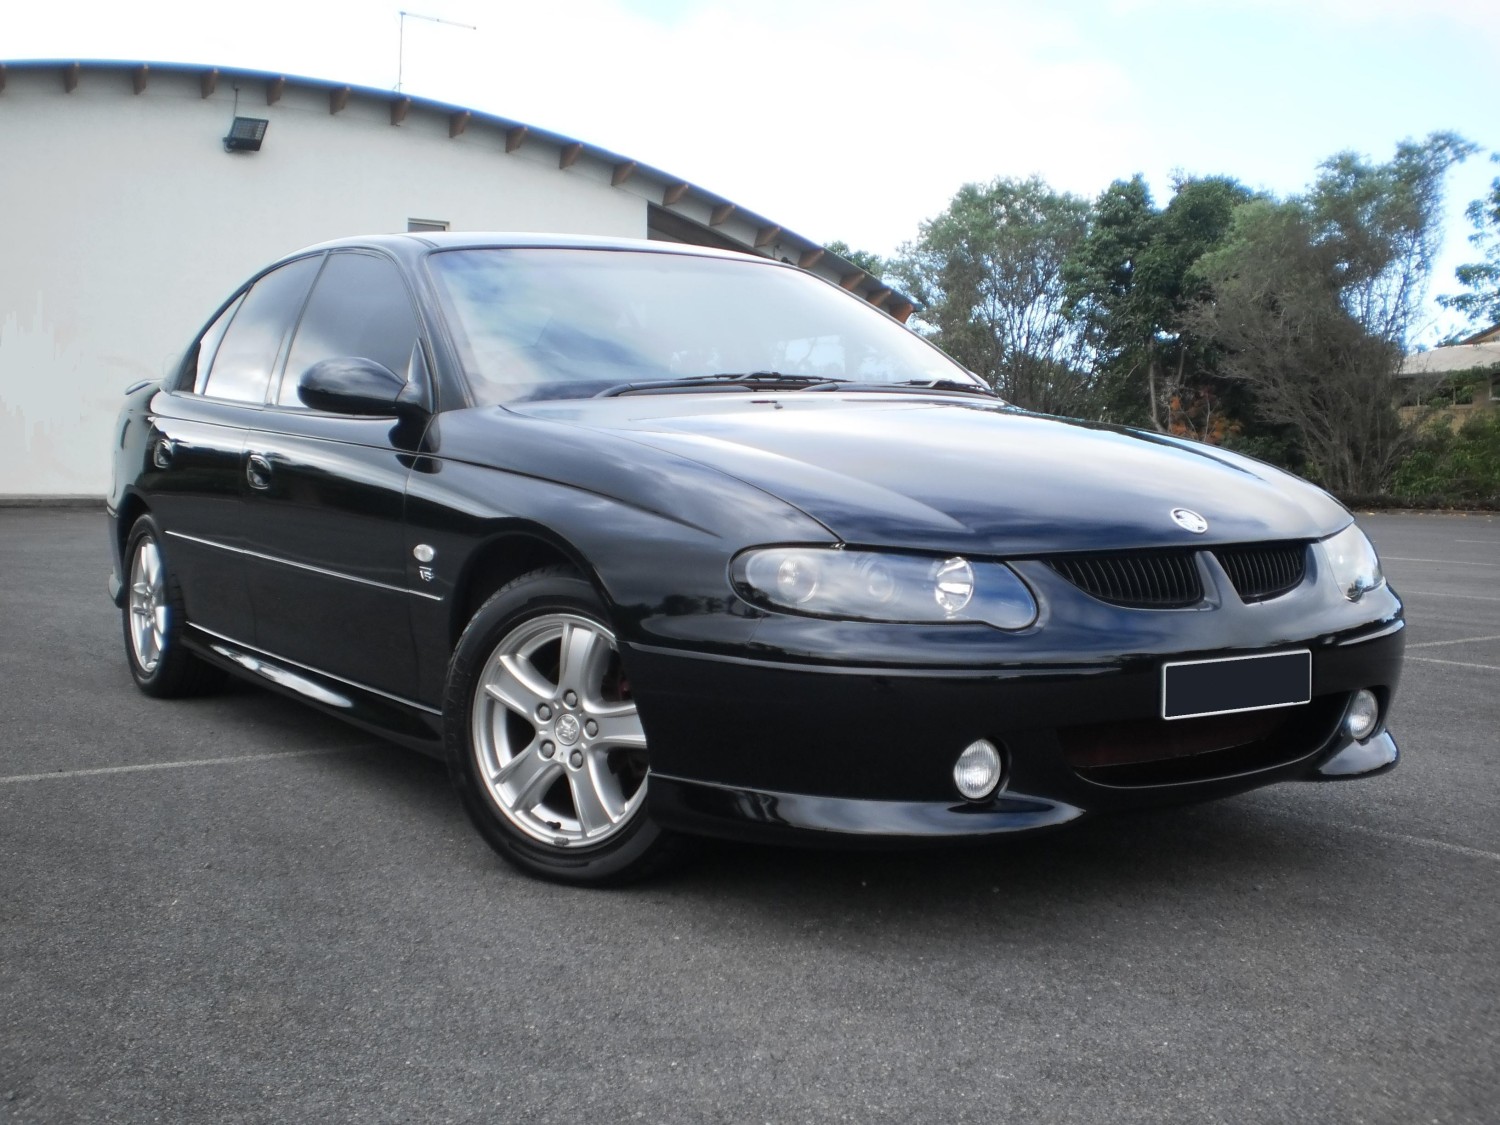 2002 Holden Commodore S VX II - Wings - Shannons Club